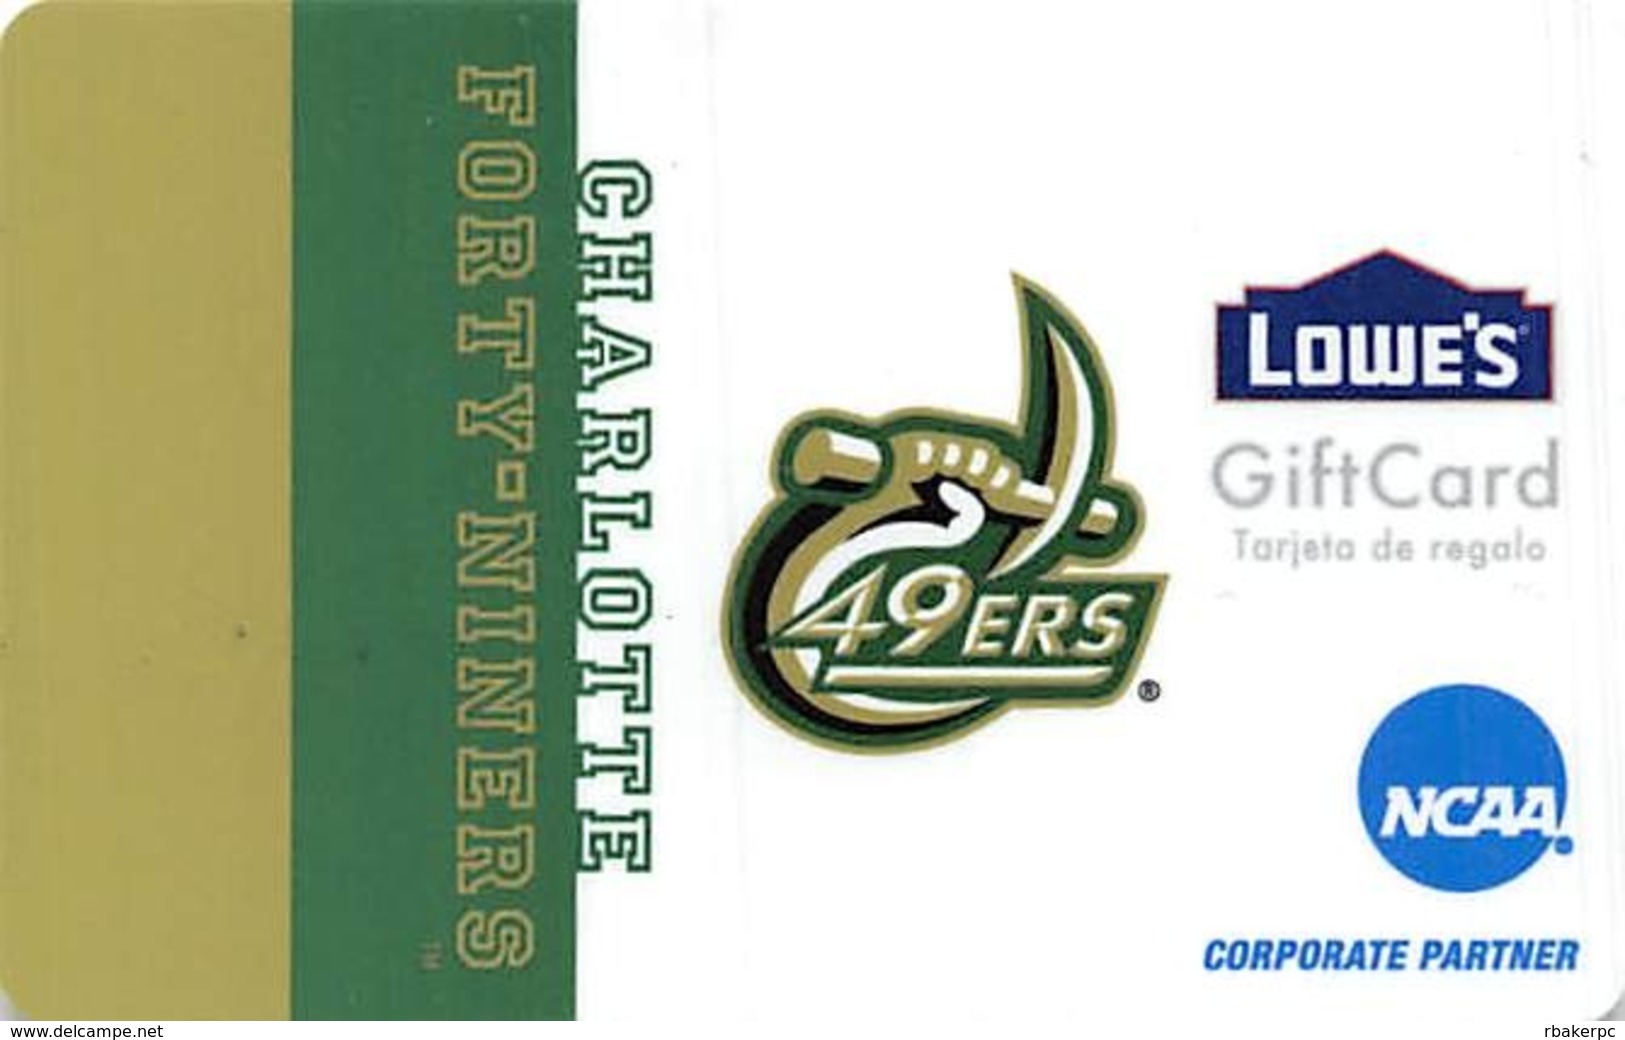 Lowes NCAA Gift Card - Charlotte Forth-Niners - Gift Cards